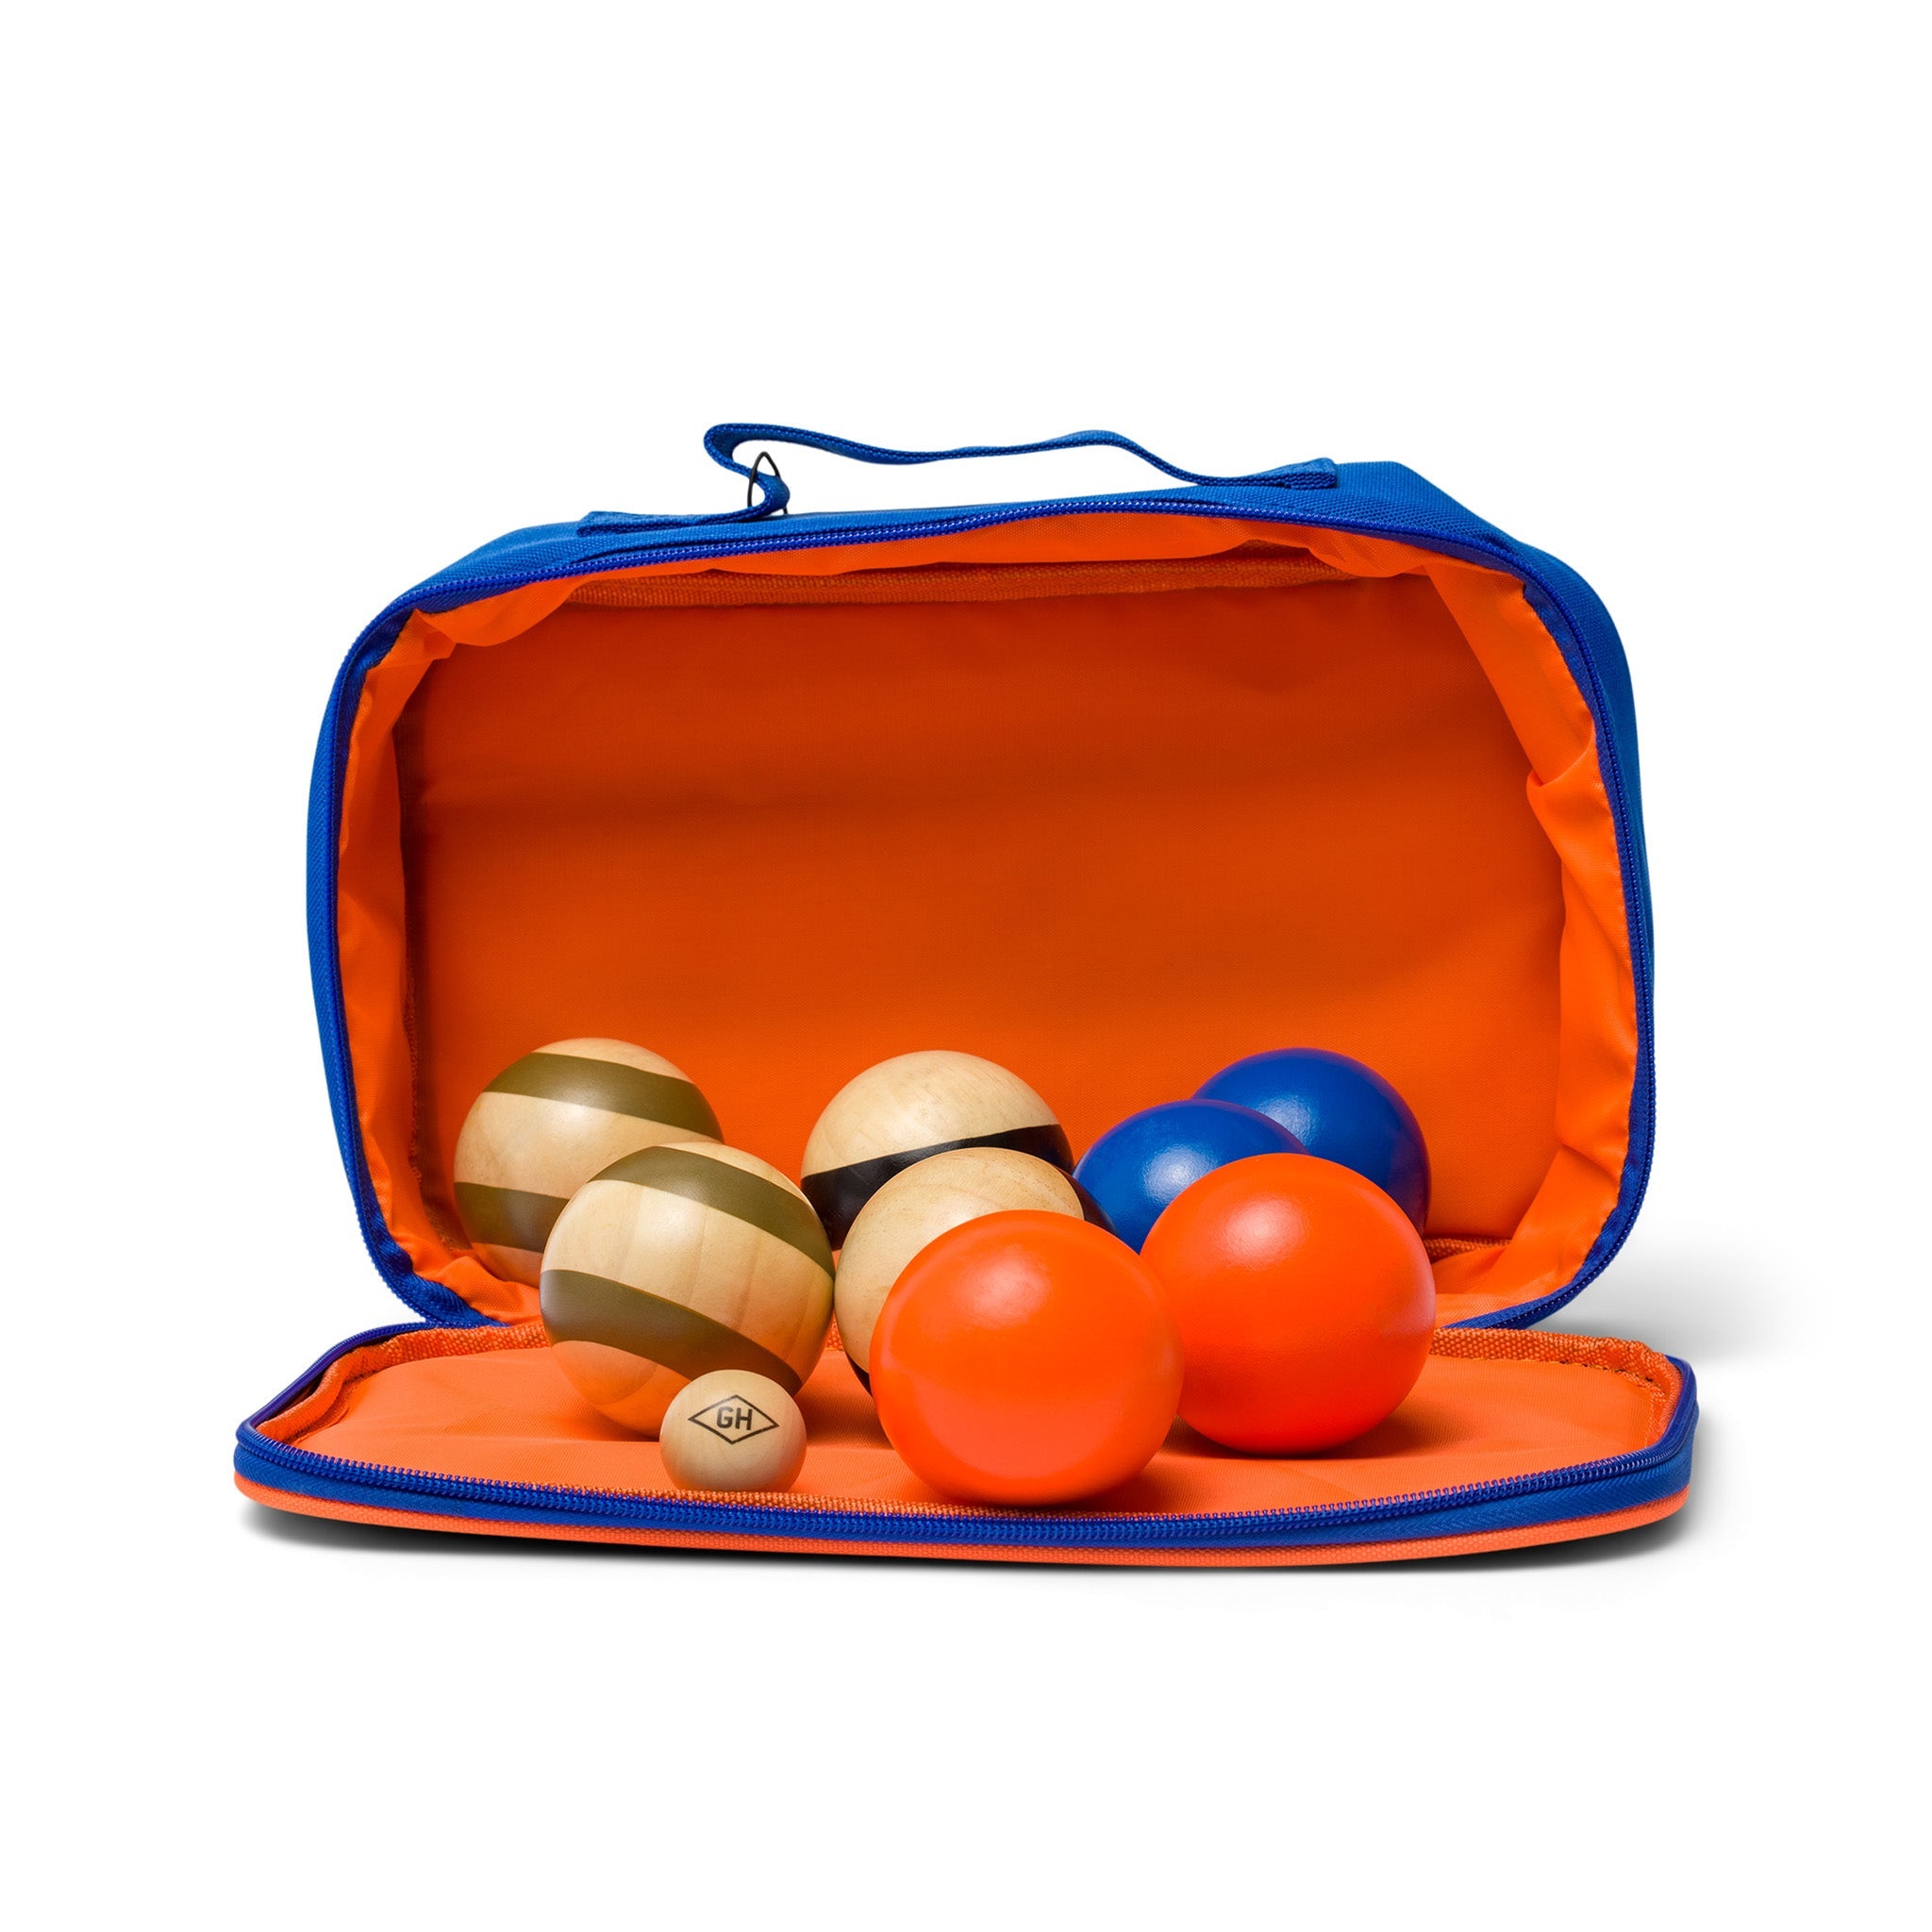 Bocce Ball set in bag